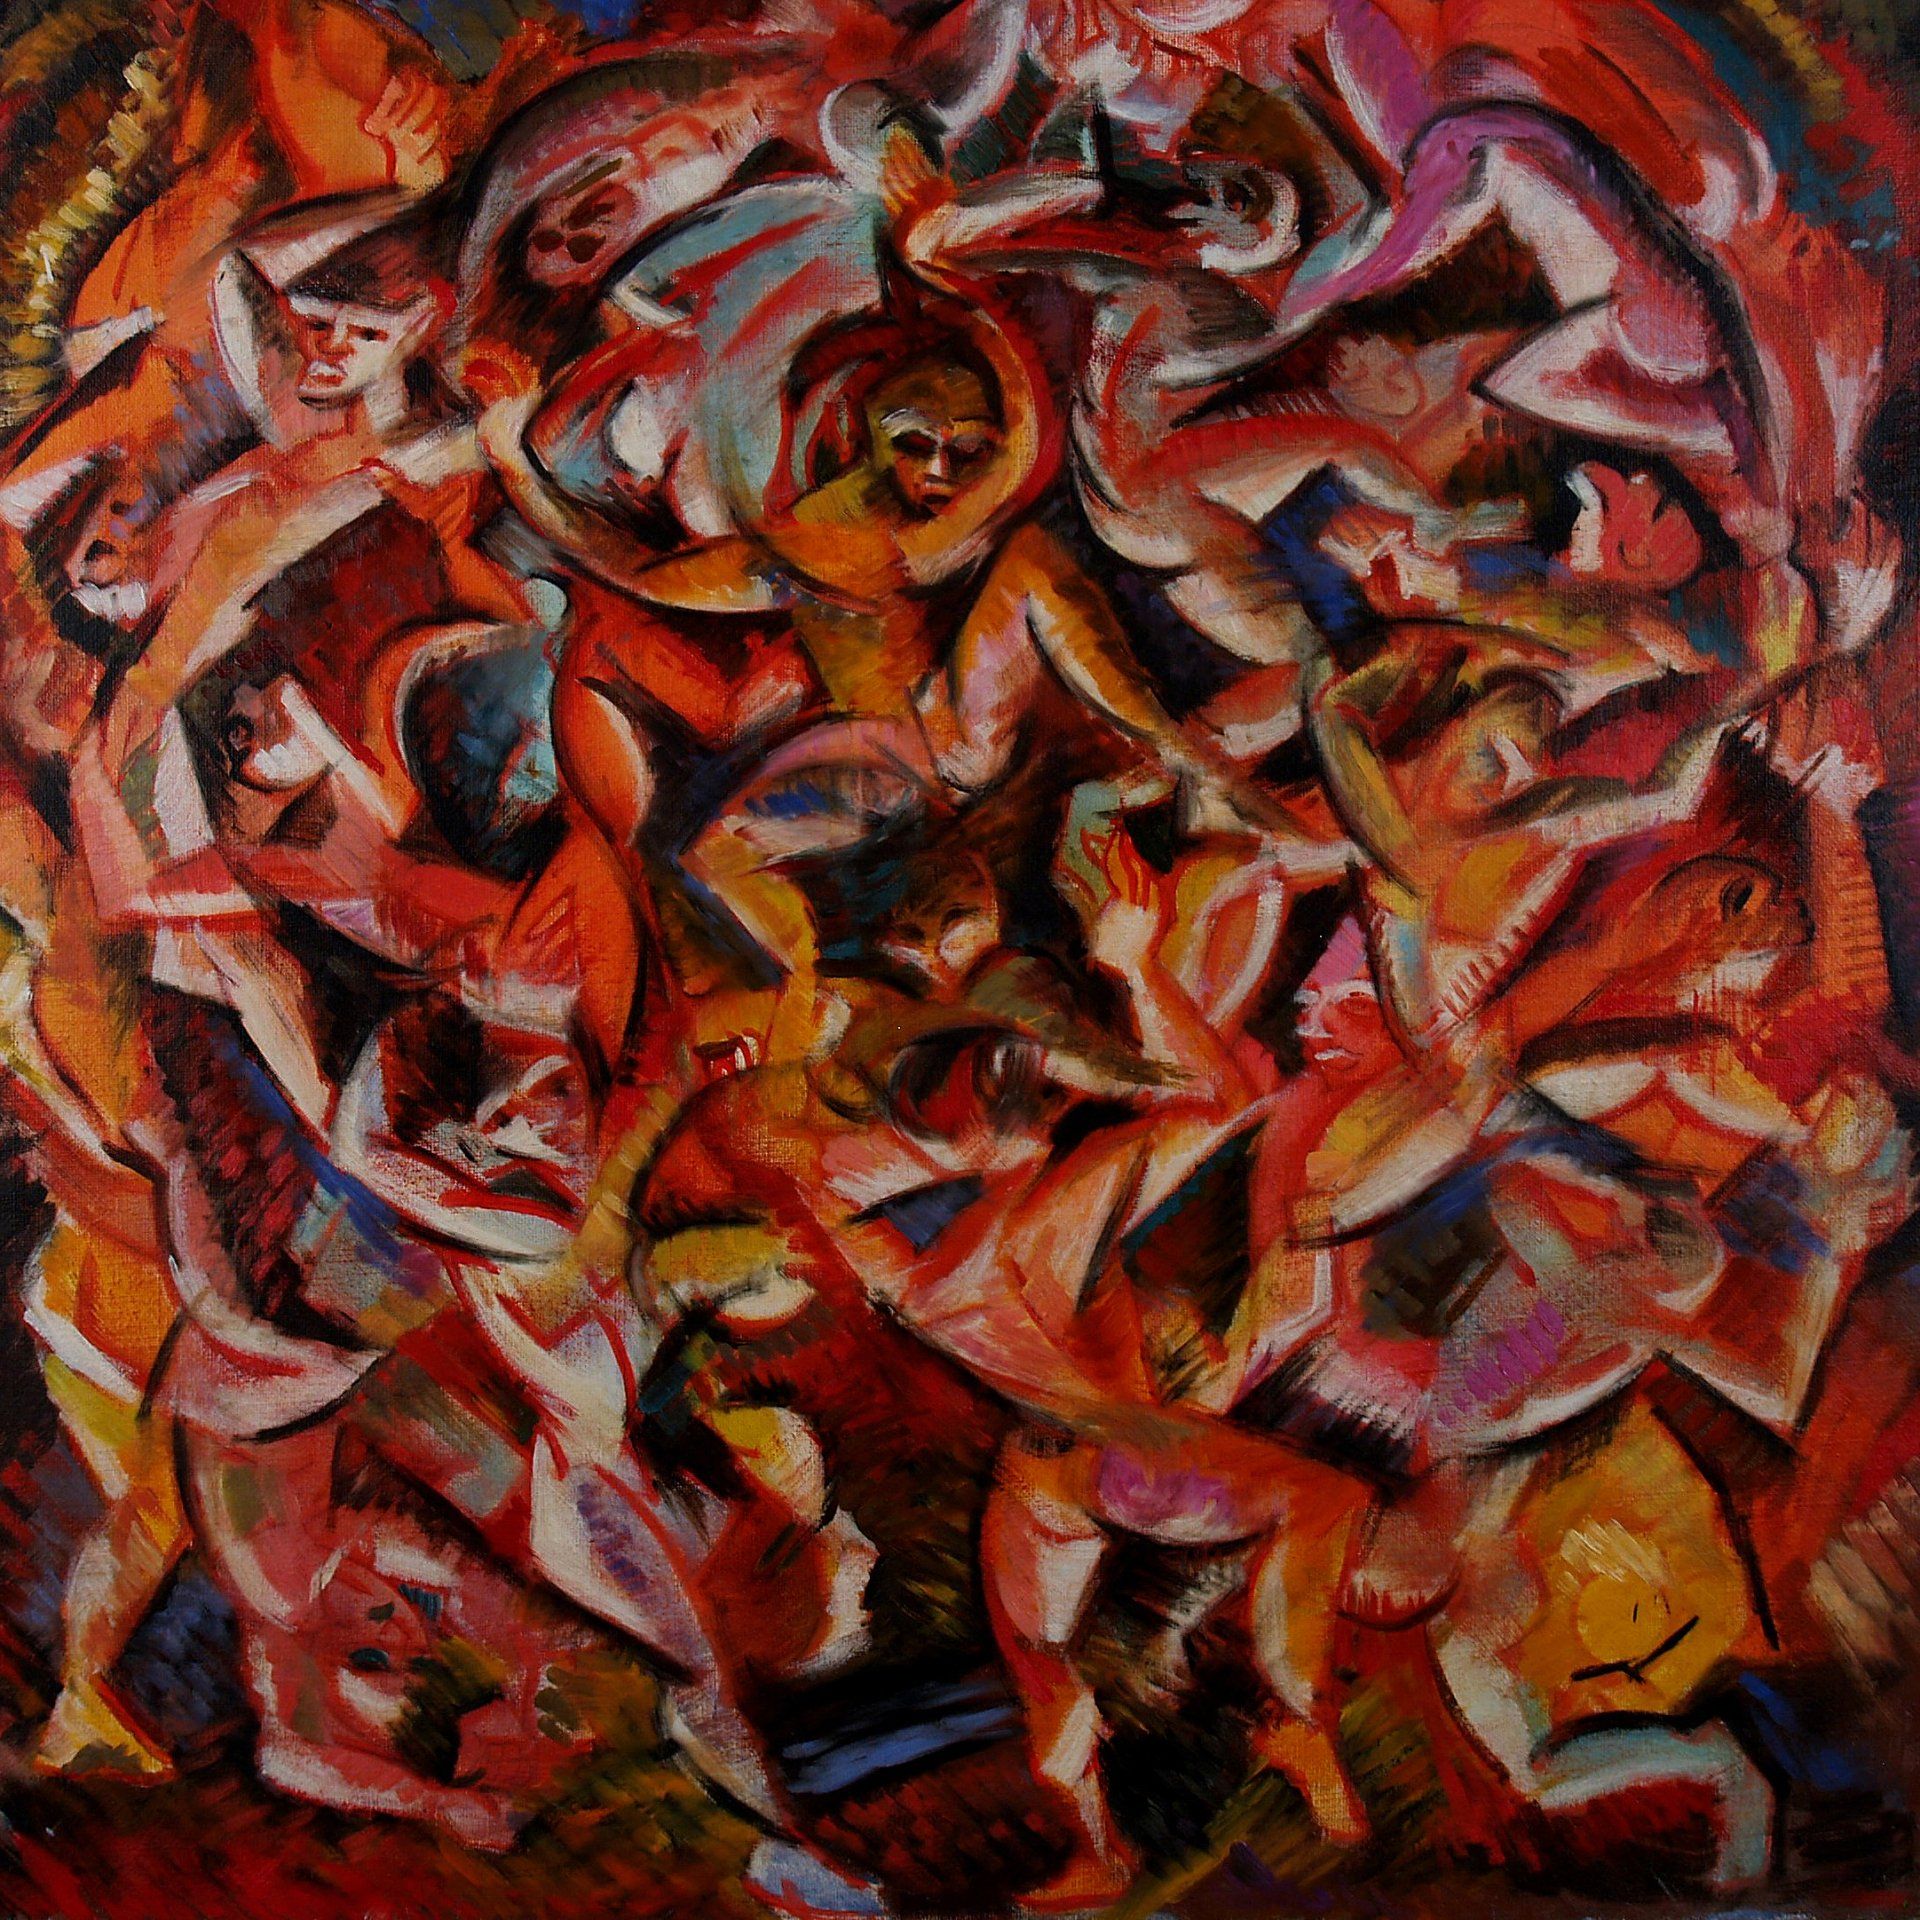 John Varriano, American Artist: Dance of the Damned